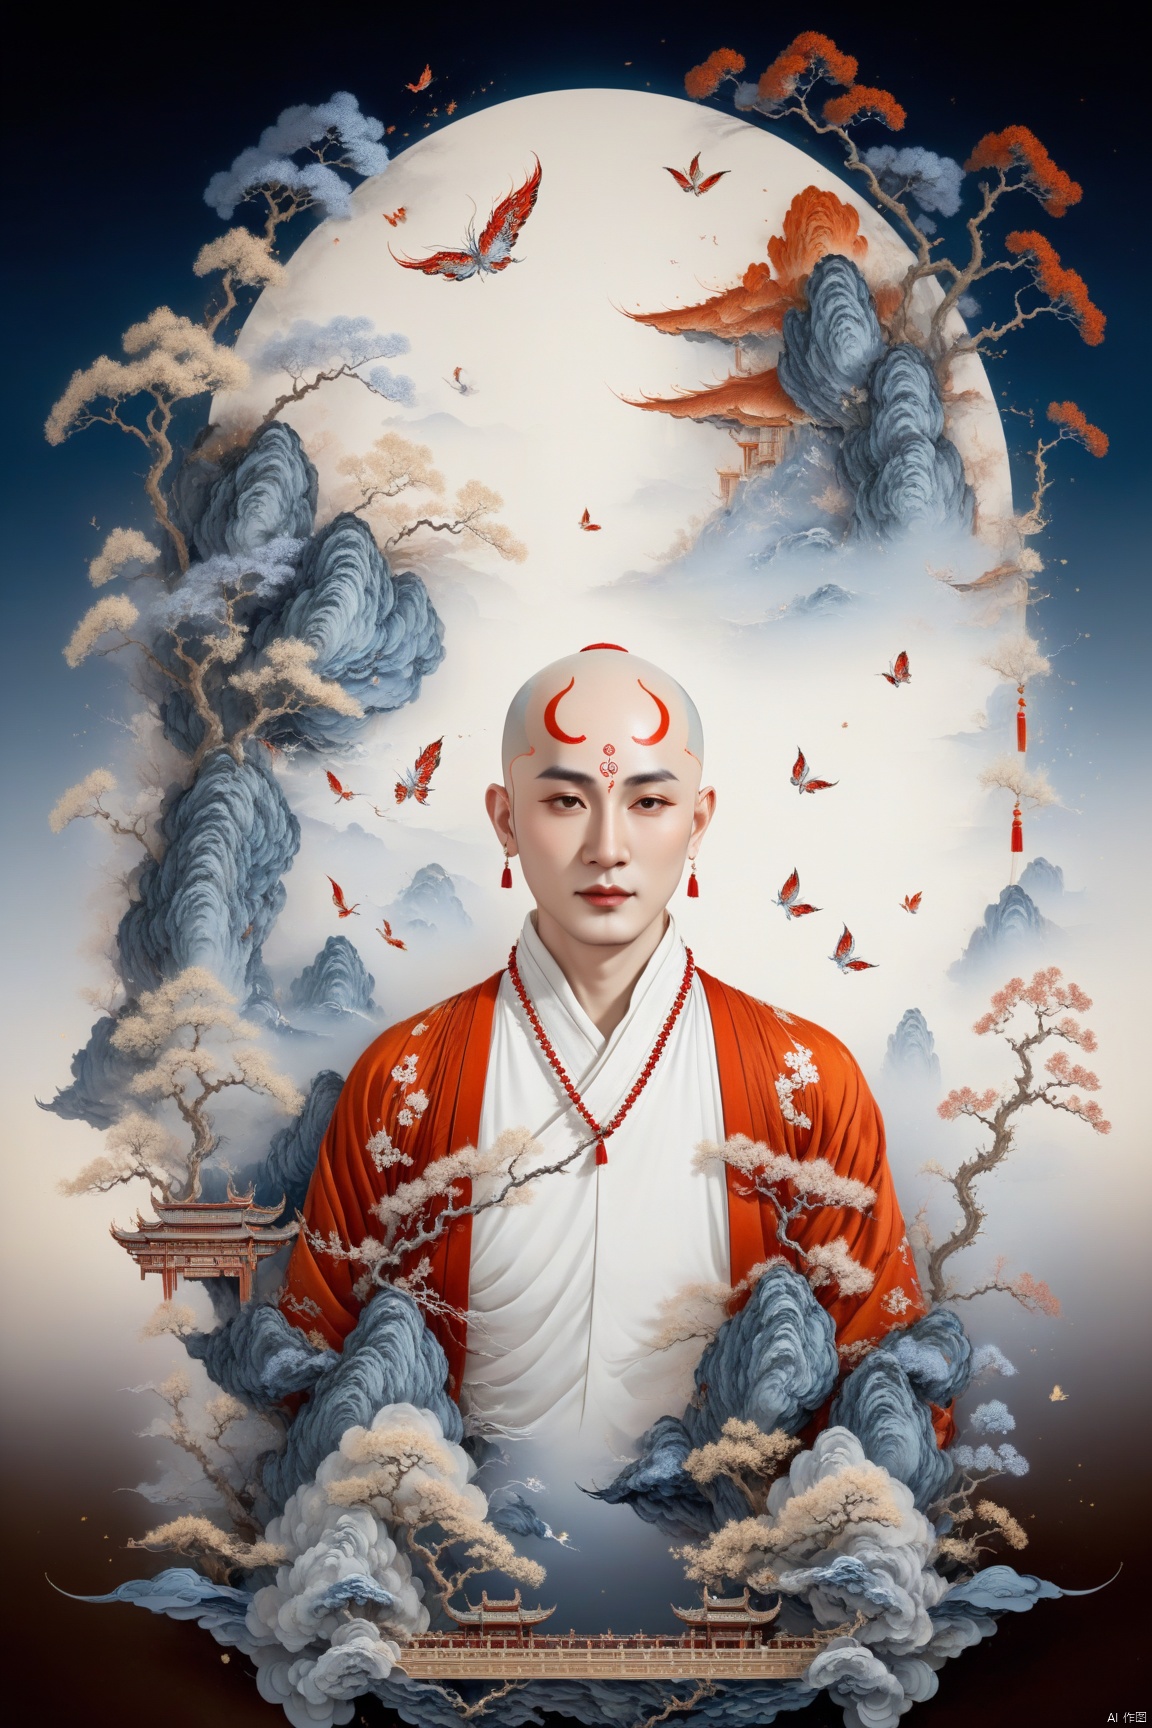  A handsome bald monk in white, put one's palms together devoutly, he wears long Buddhist beads around his neck, a touch of red vermilion between the brow, fluttering around silver butterflies, charming gaze, epic fantasy scenes, handsome, influenced by ancient chinese art, elaborate costumes, high details, more details, high quality, best quality, UHD, 4K